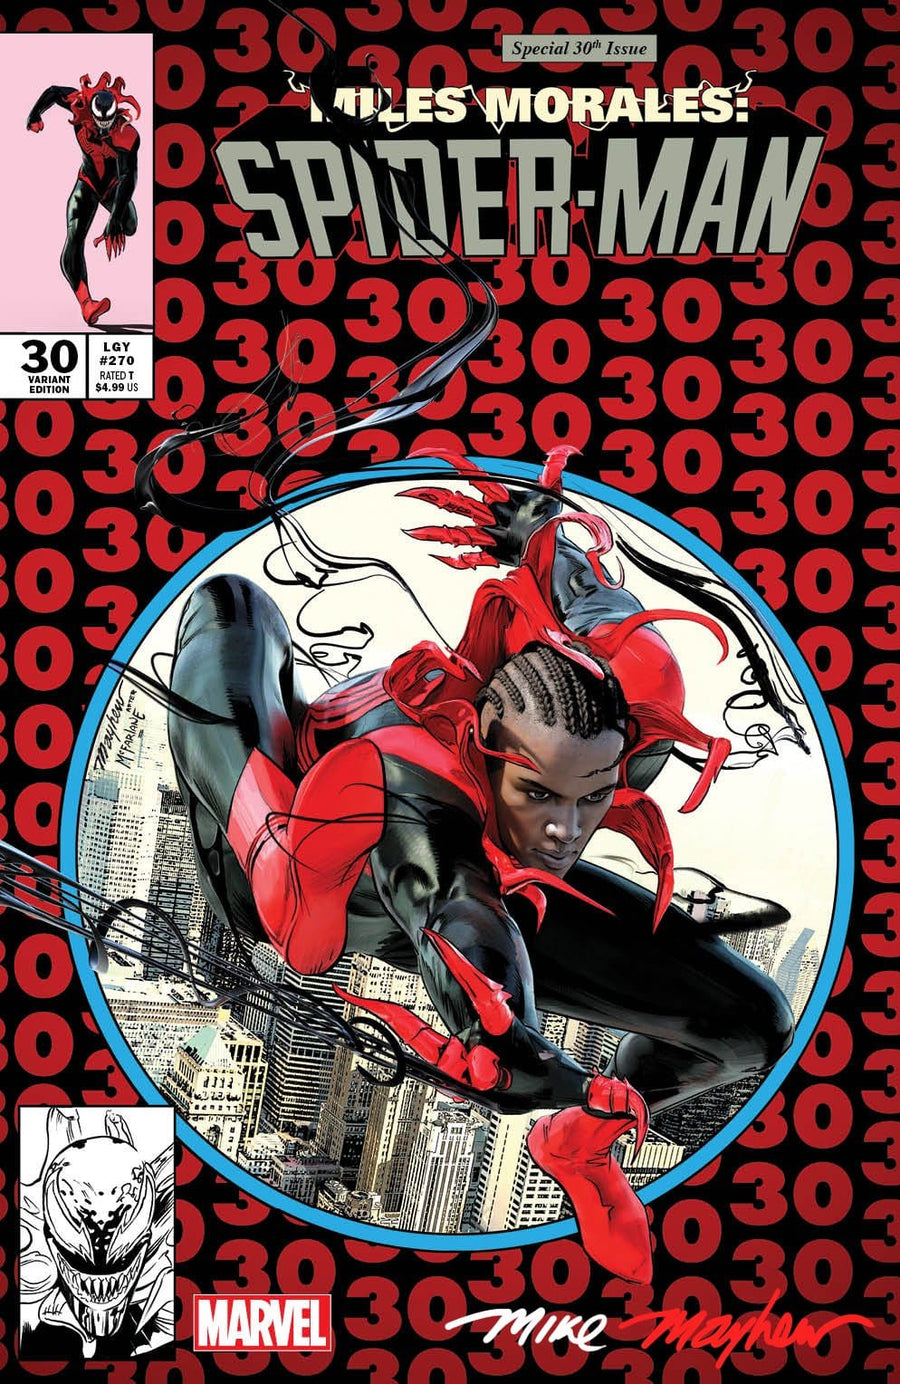 MILES MORALES SPIDER-MAN #30 MIKE MAYHEW STUDIO VARIANT COVER A TRADE DRESS SIGNED FULL NAME DUO-TONE WITH COA